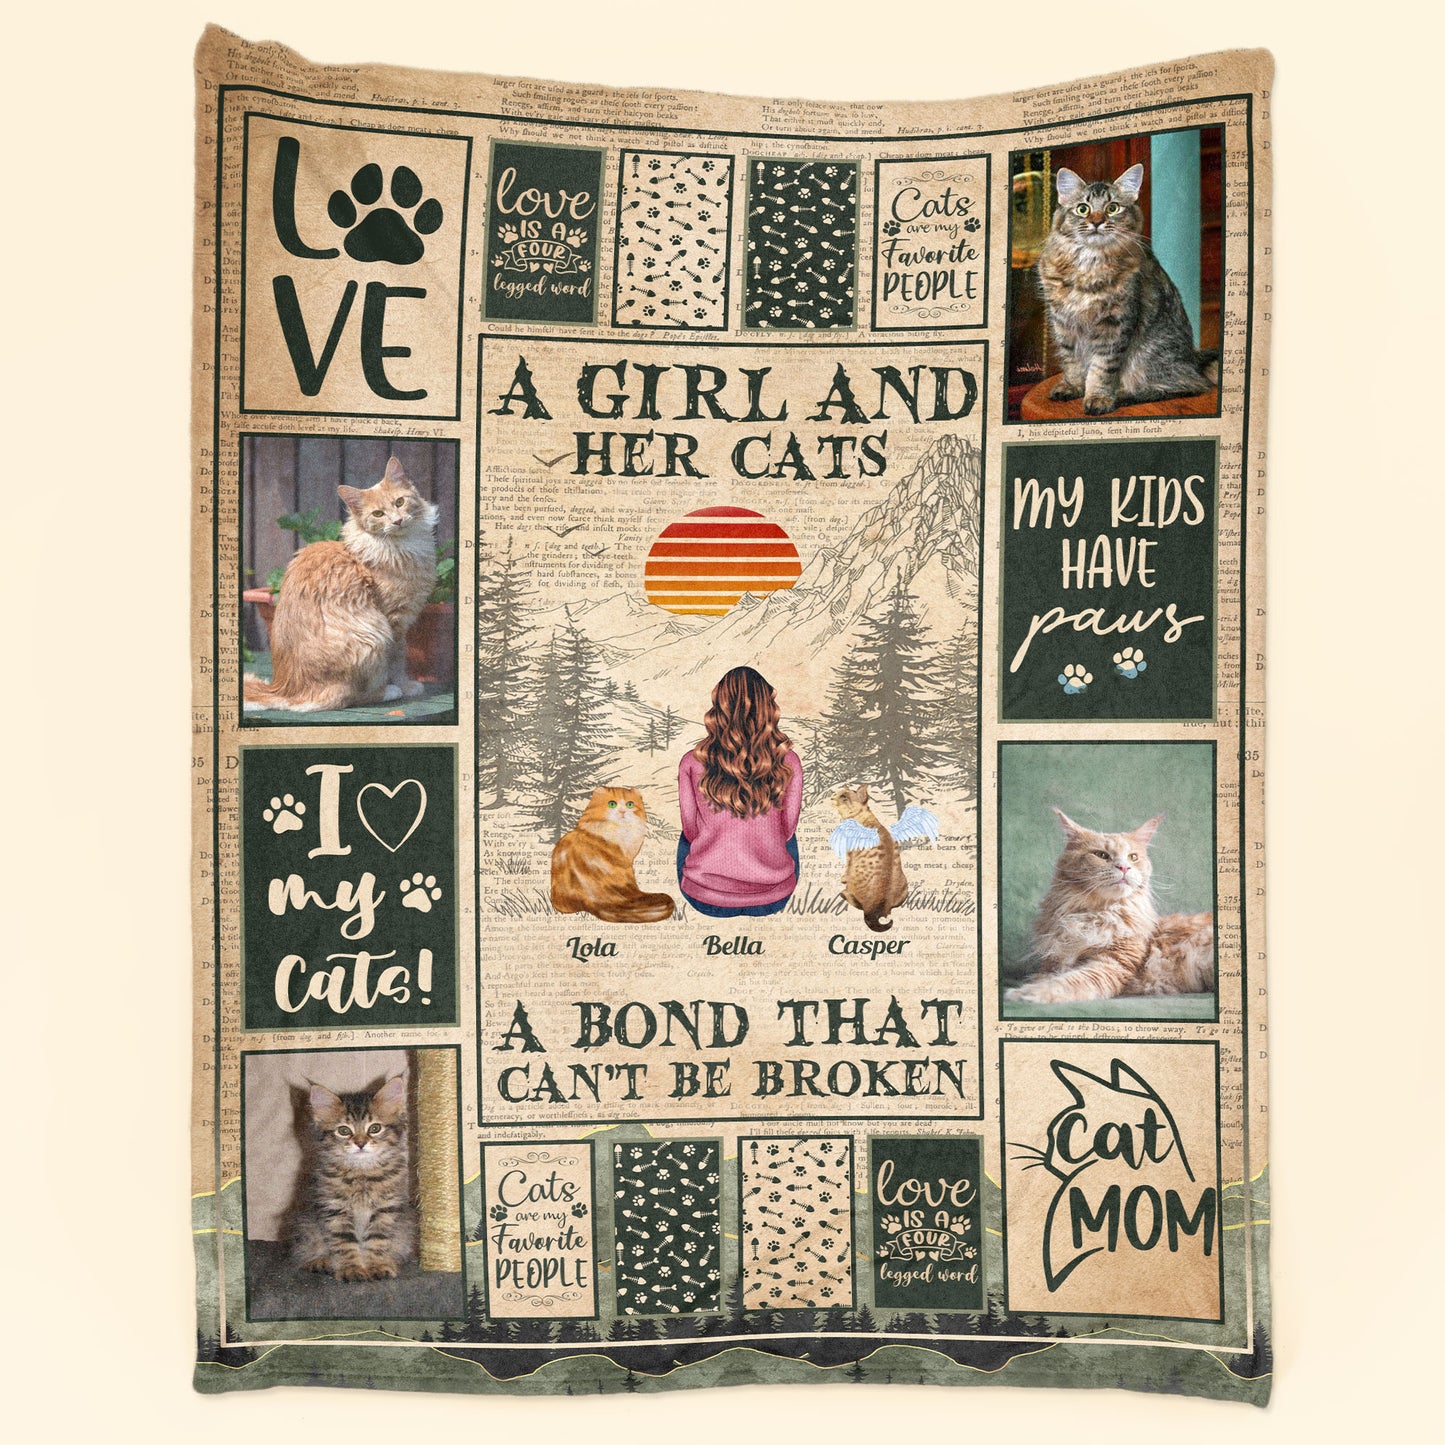 A Girl And Her Cats Unbreakable Bond - Personalized Photo Blanket